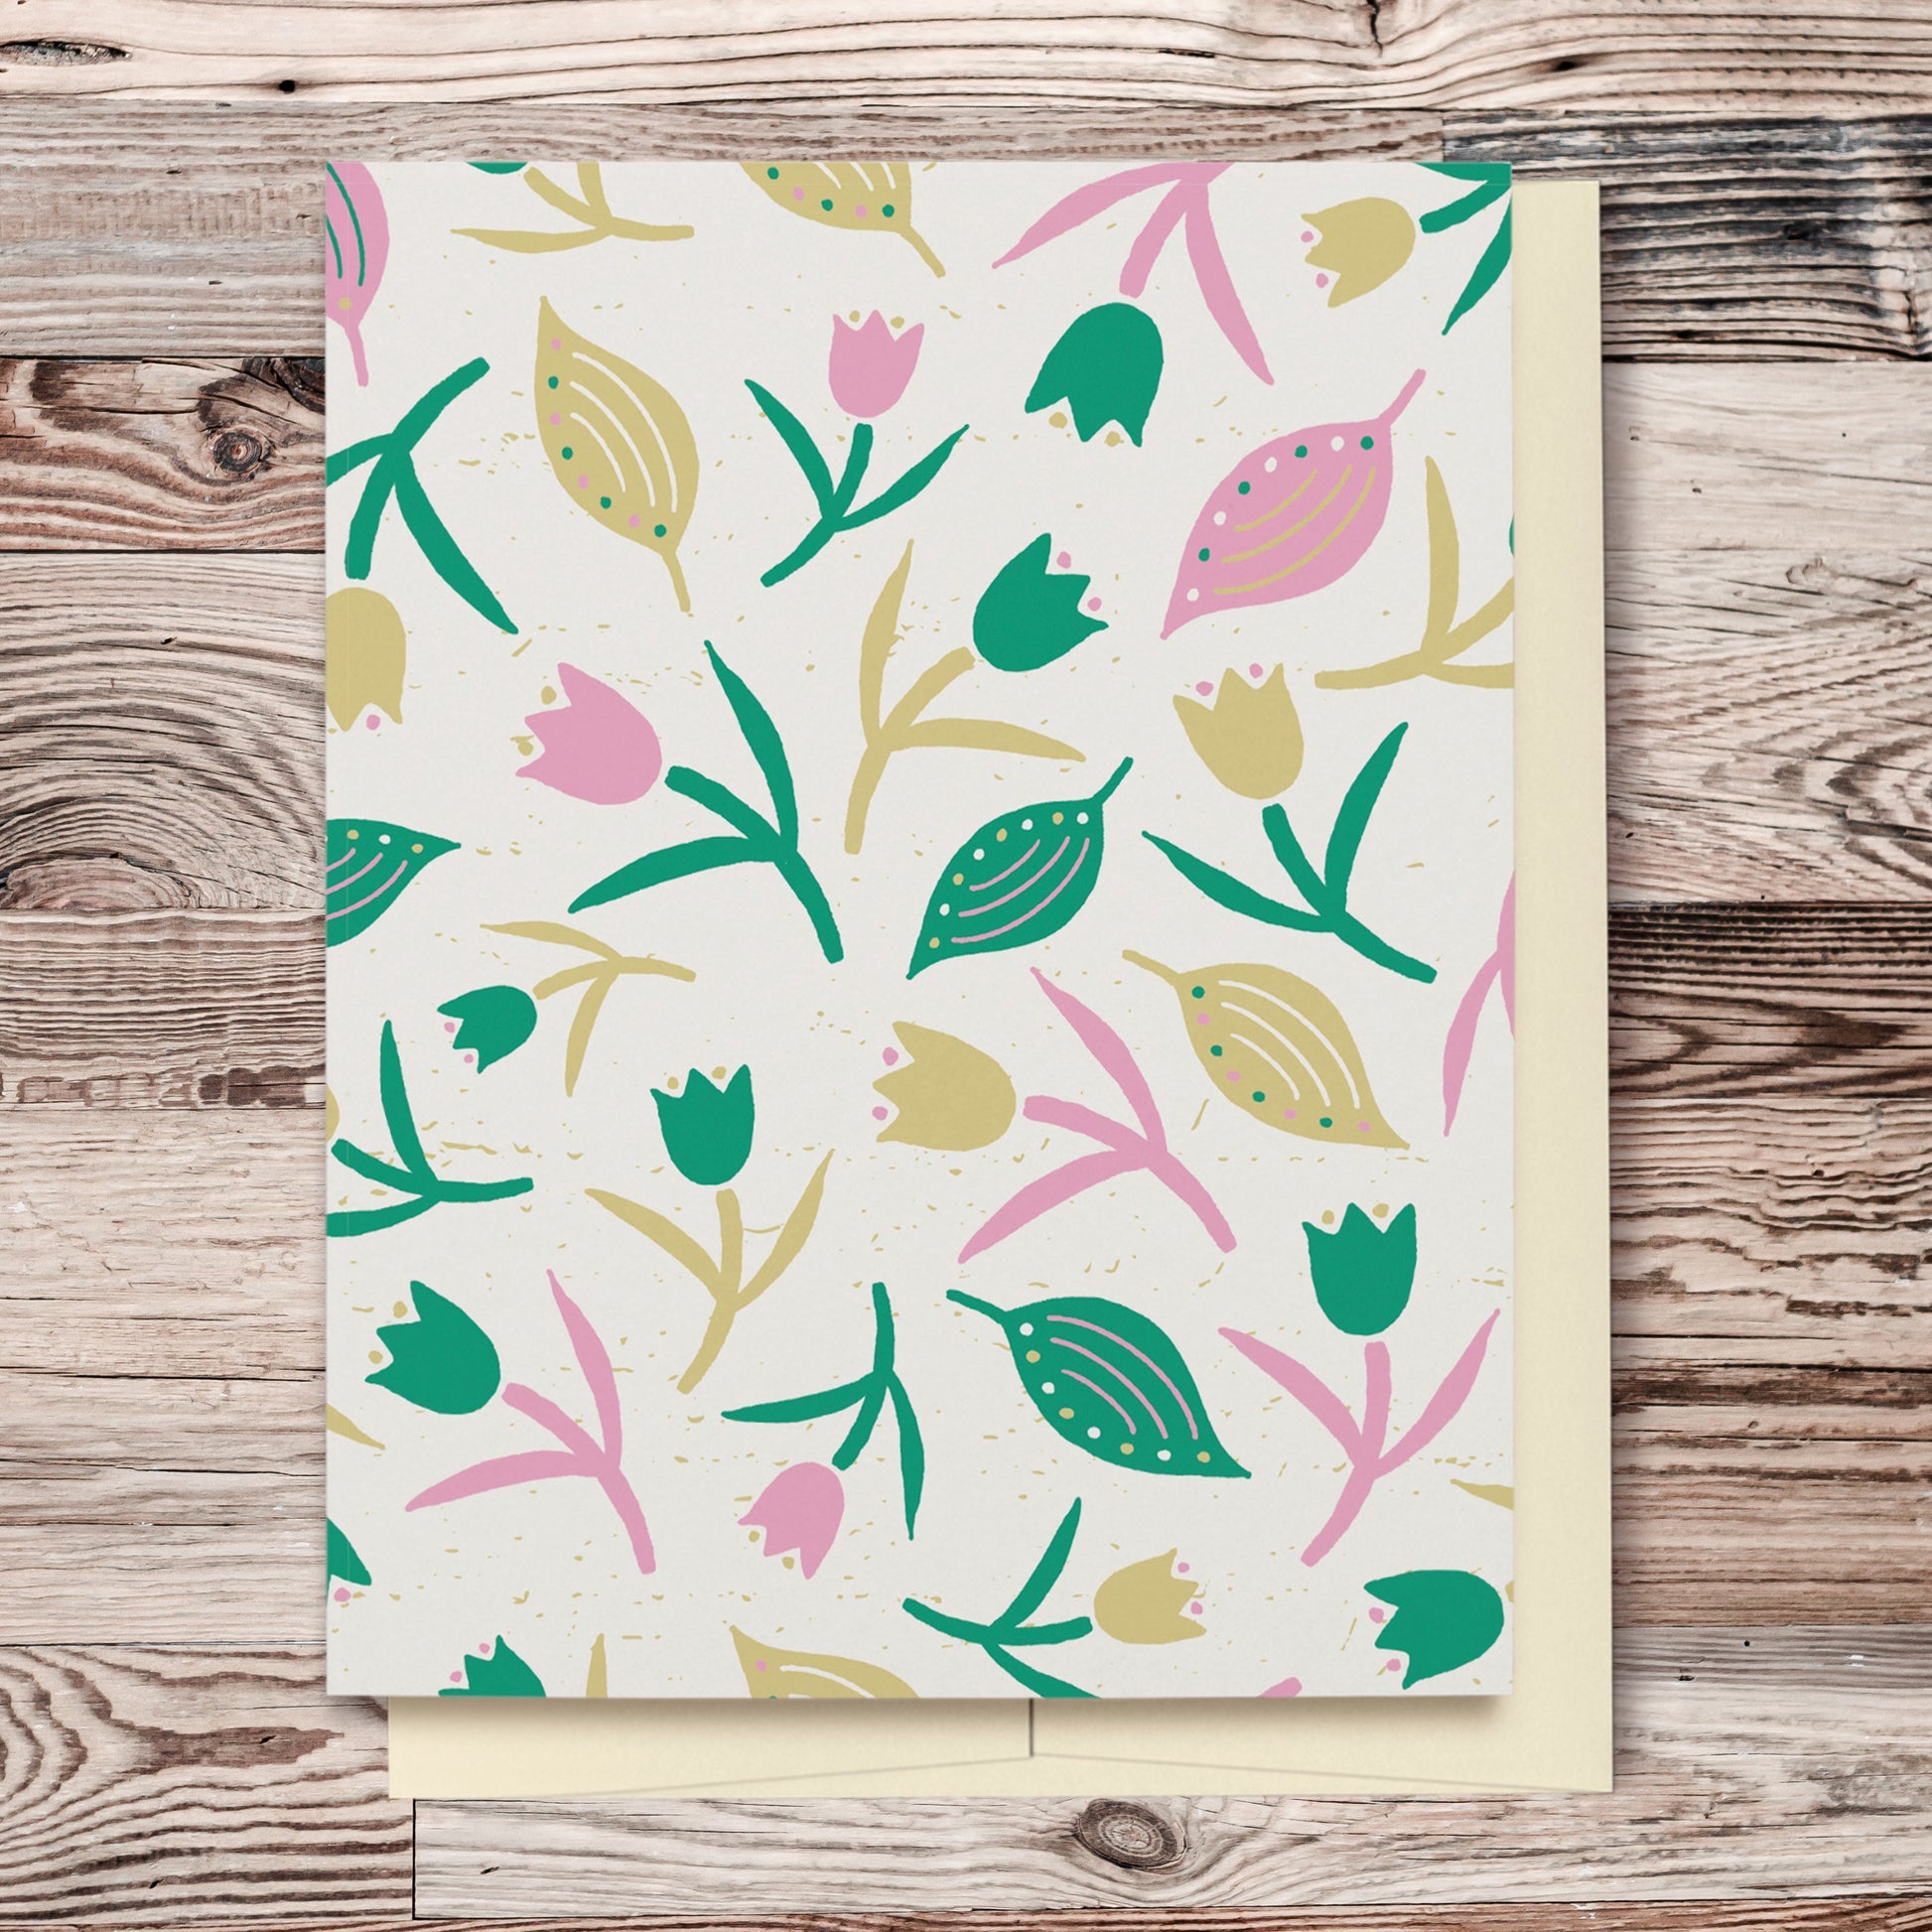 Tulips & Leaves Cream, Green & Pink Blank Card features a pattern with tulips and leaves in shades of green and pink on a cream background. The pattern extends over the back of the card too. Displayed on a wooden background.